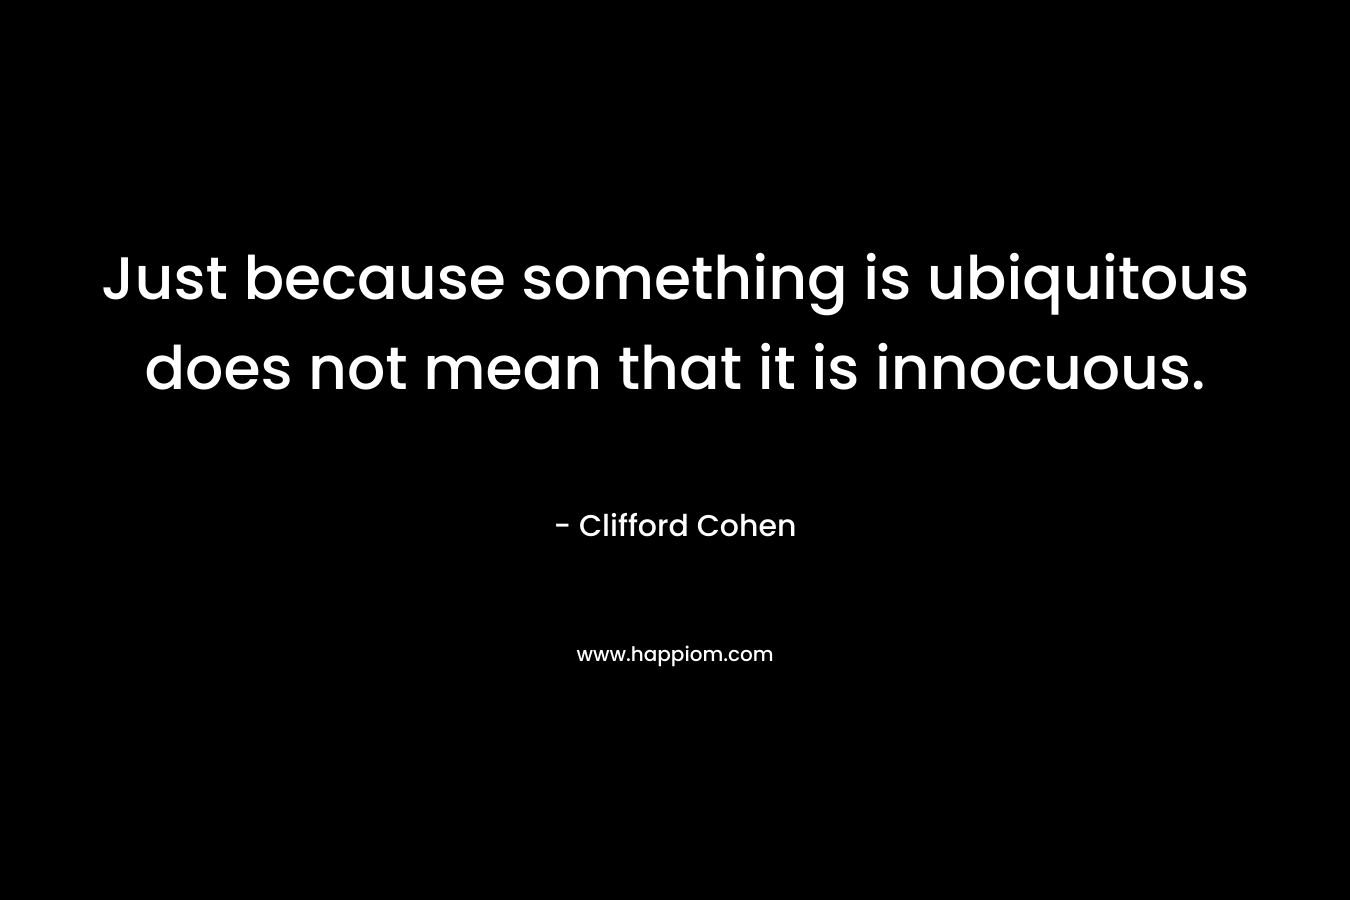 Just because something is ubiquitous does not mean that it is innocuous. – Clifford Cohen